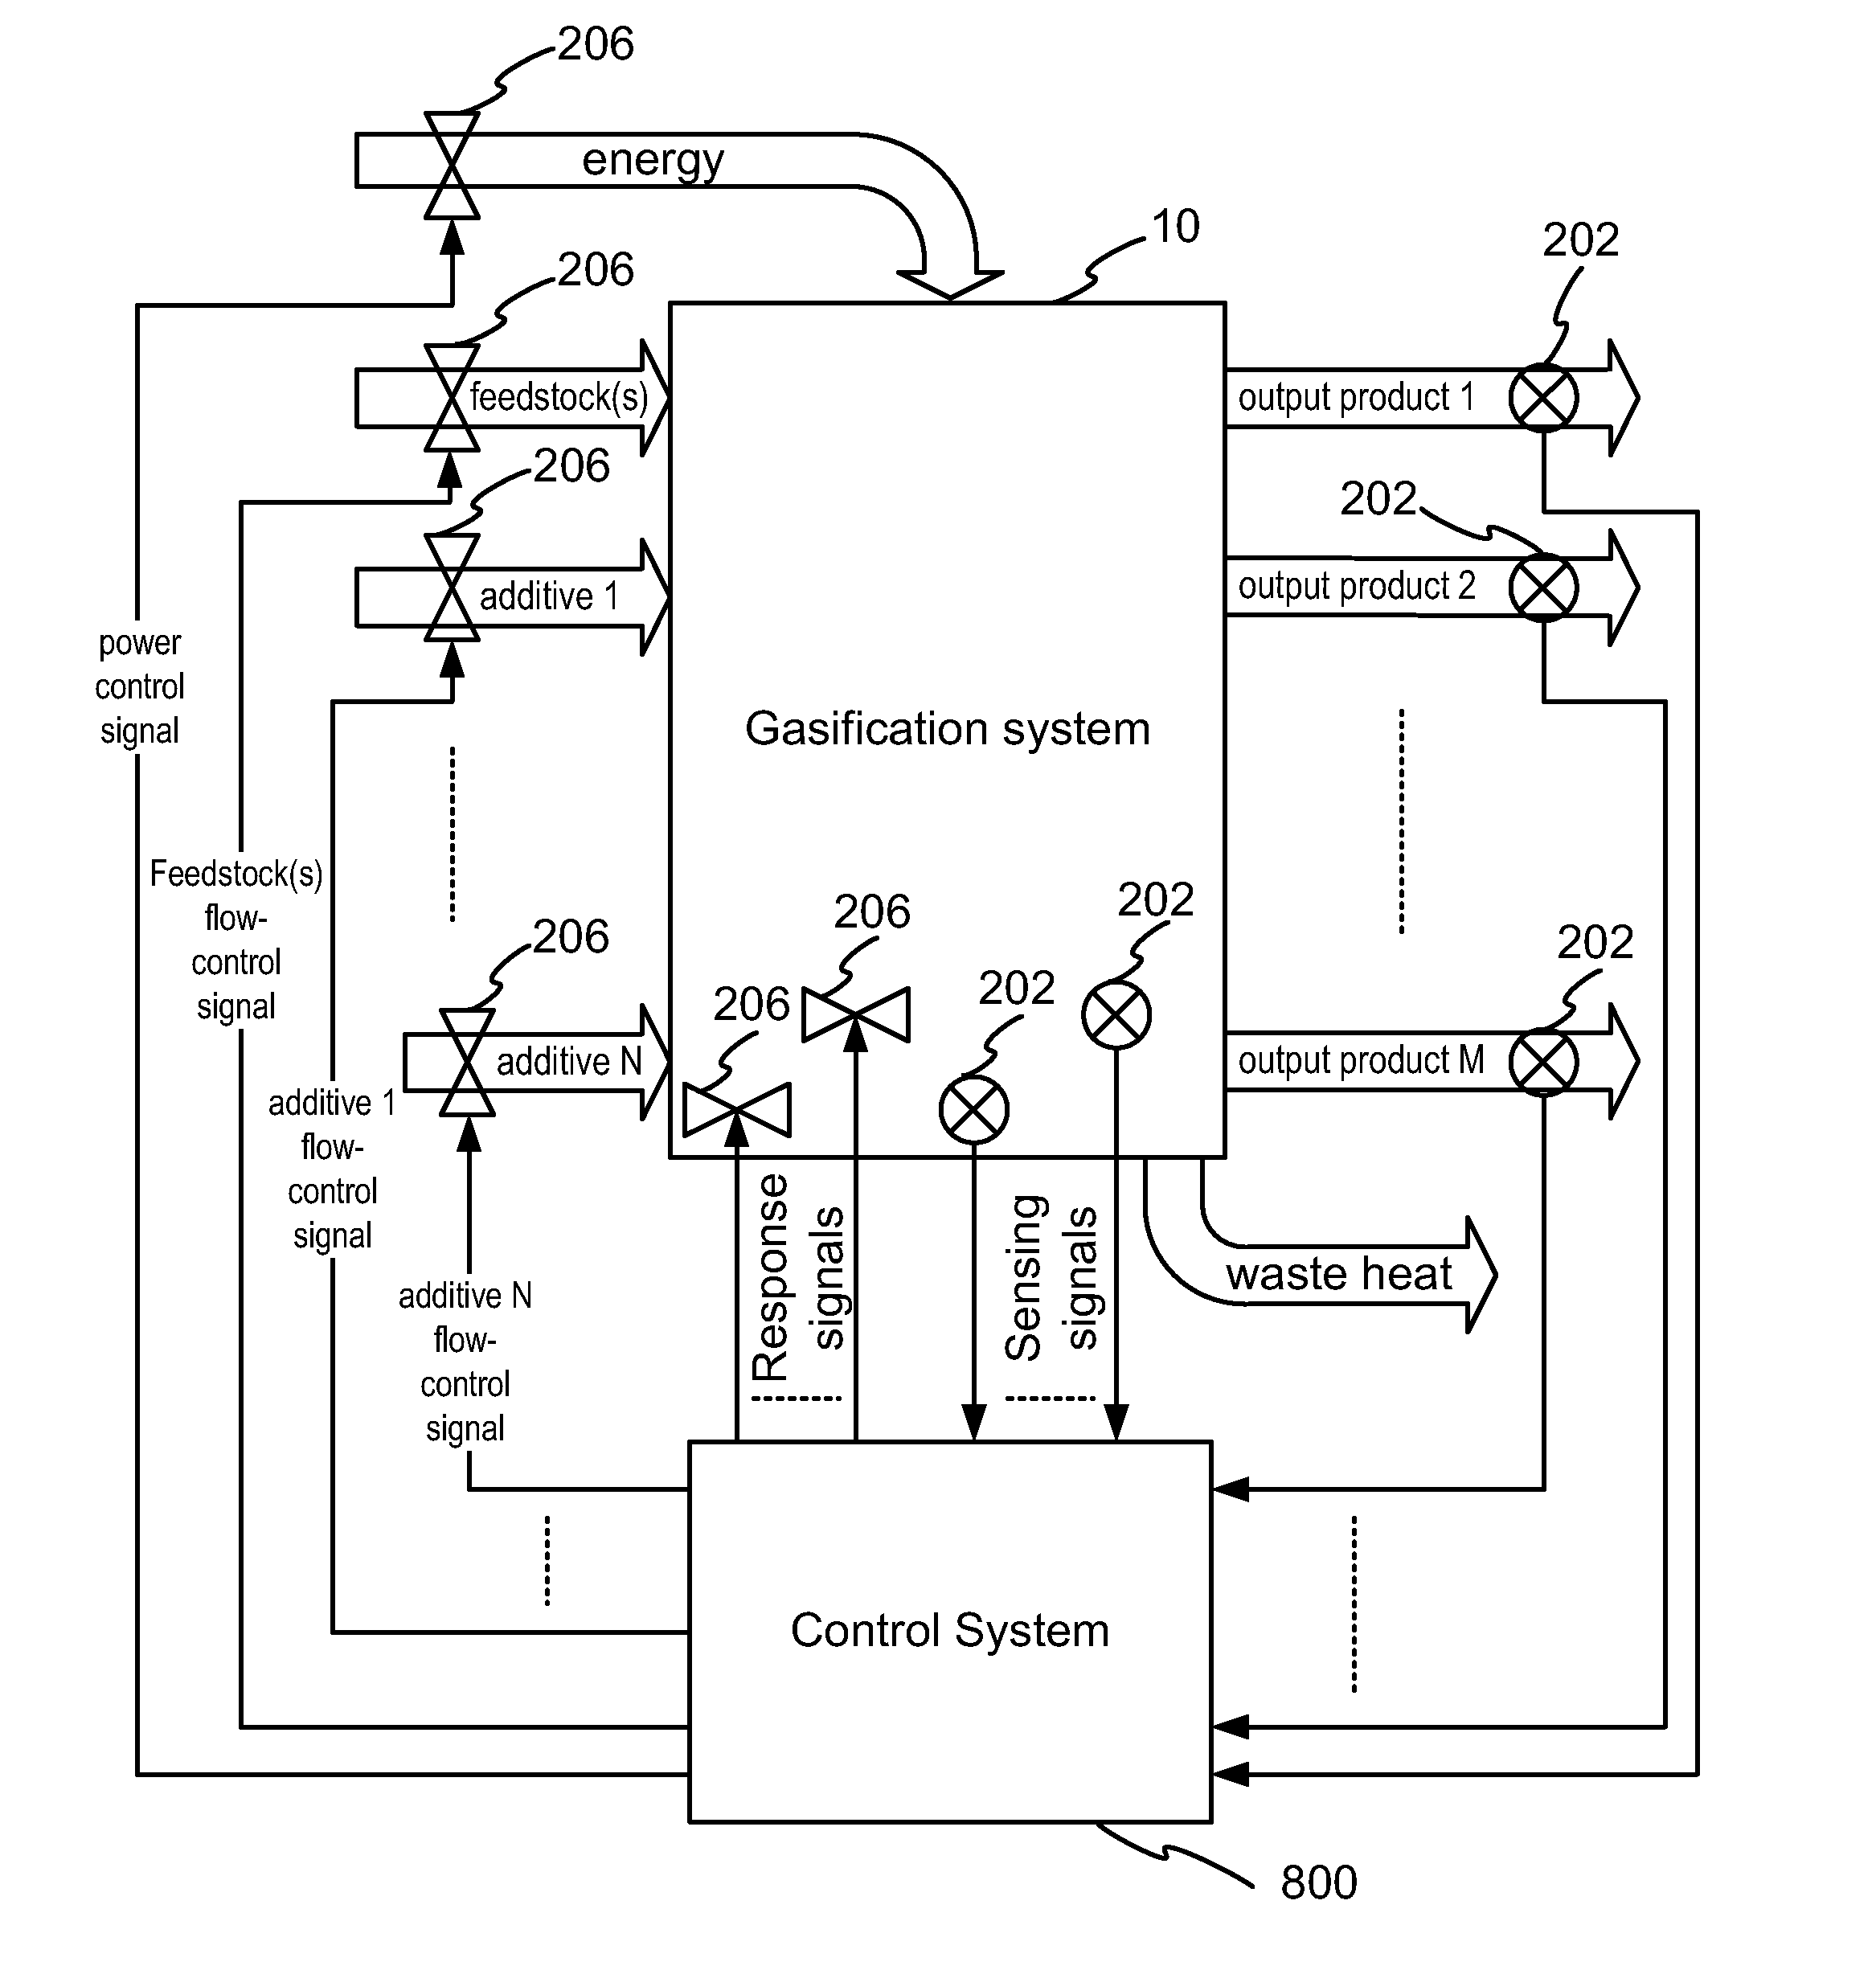 Control System for the Conversion of Carbonaceous Feedstock into Gas